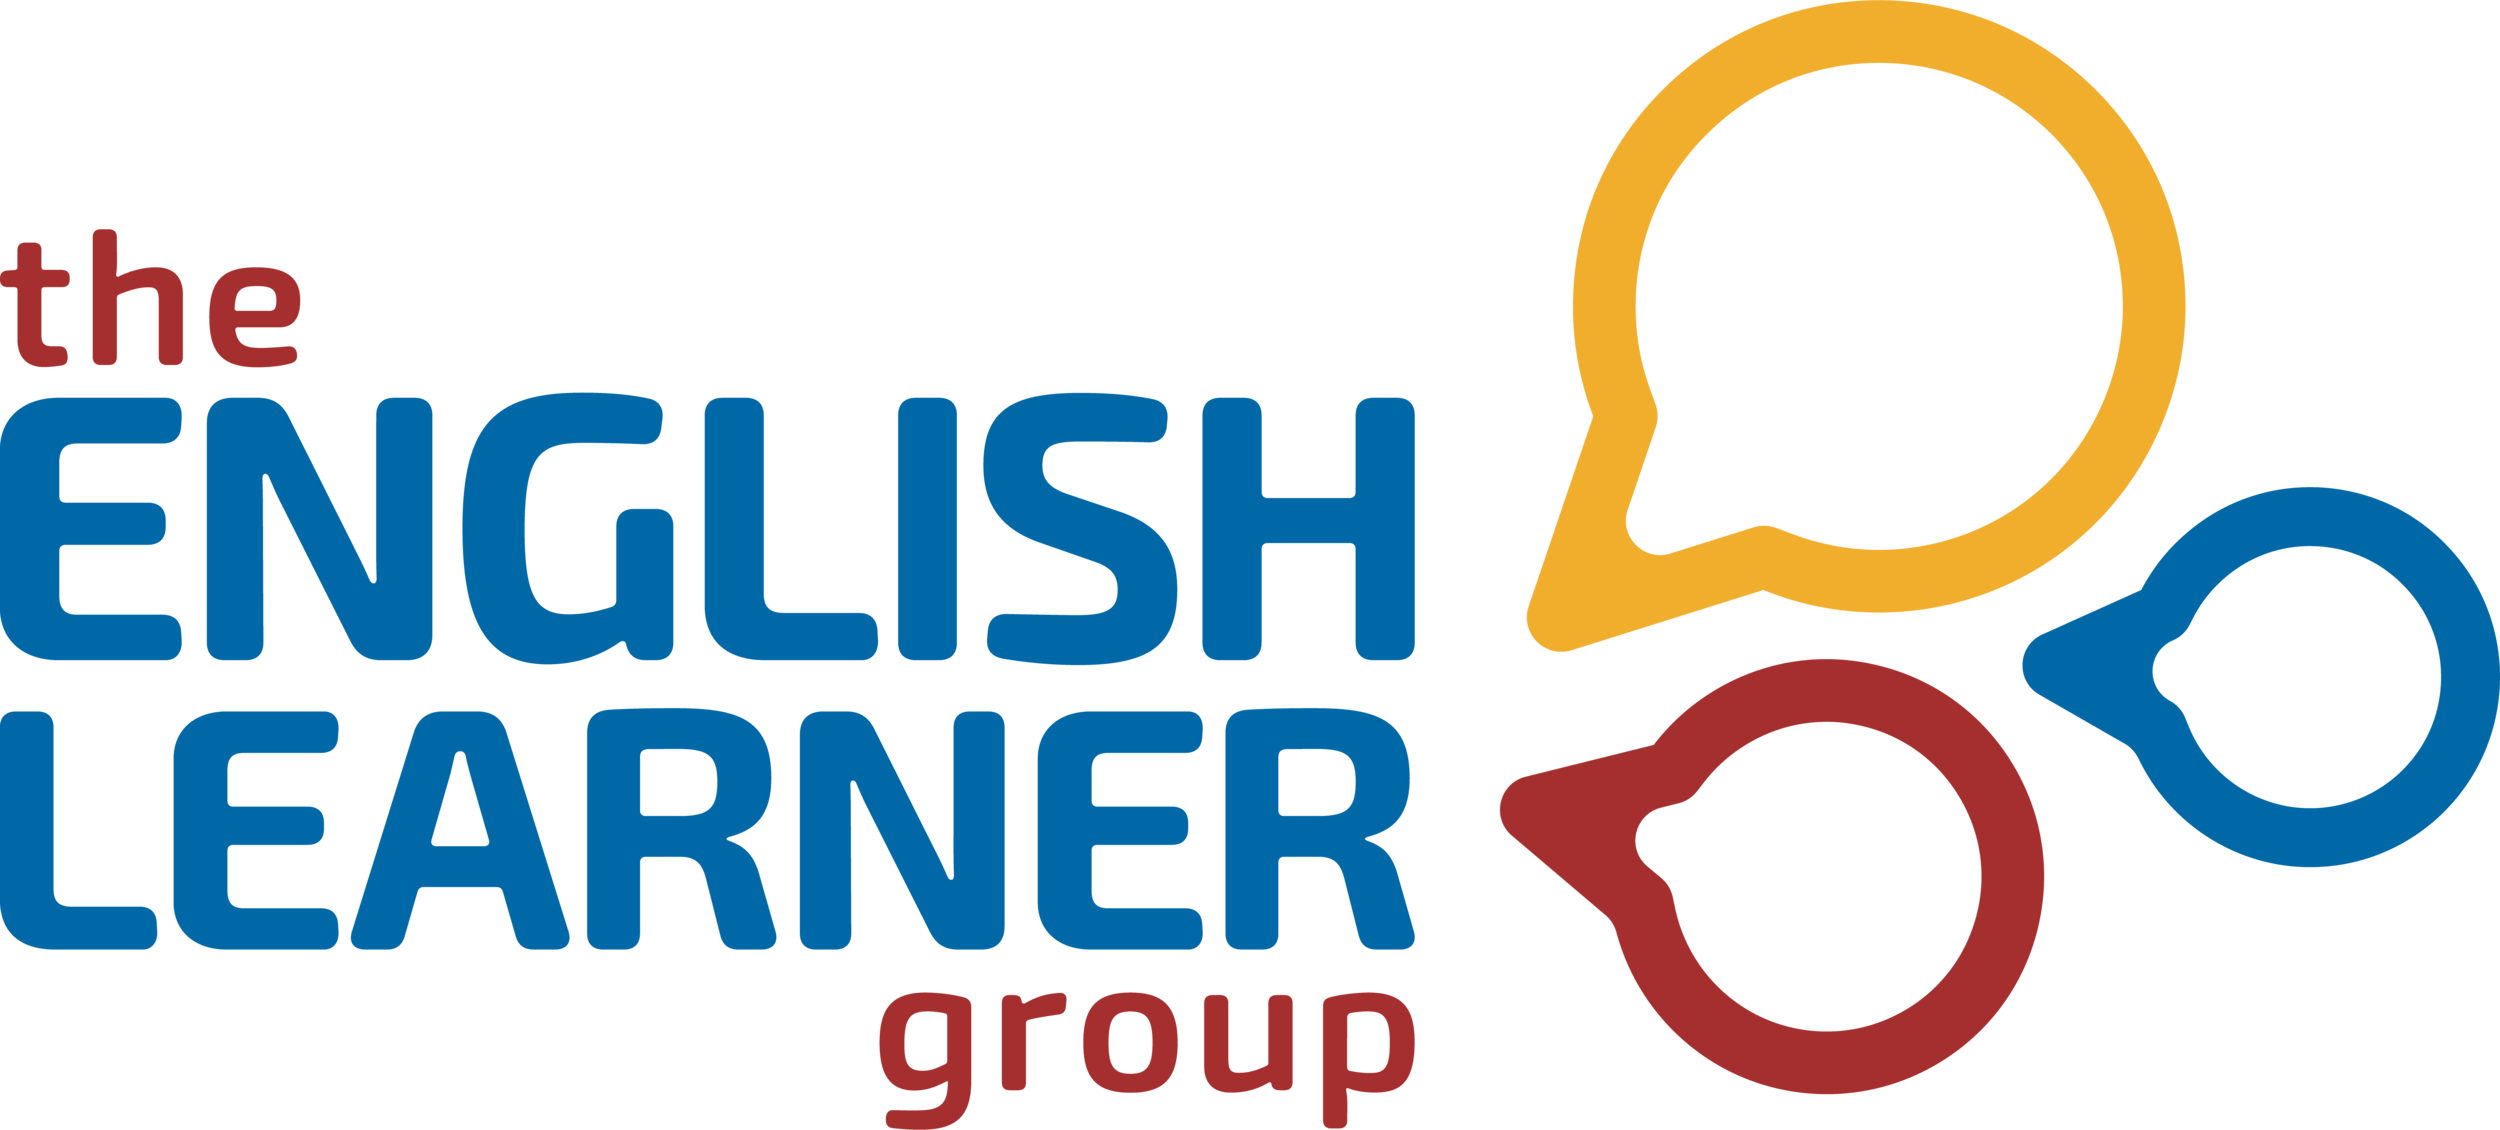 The English Learner Group